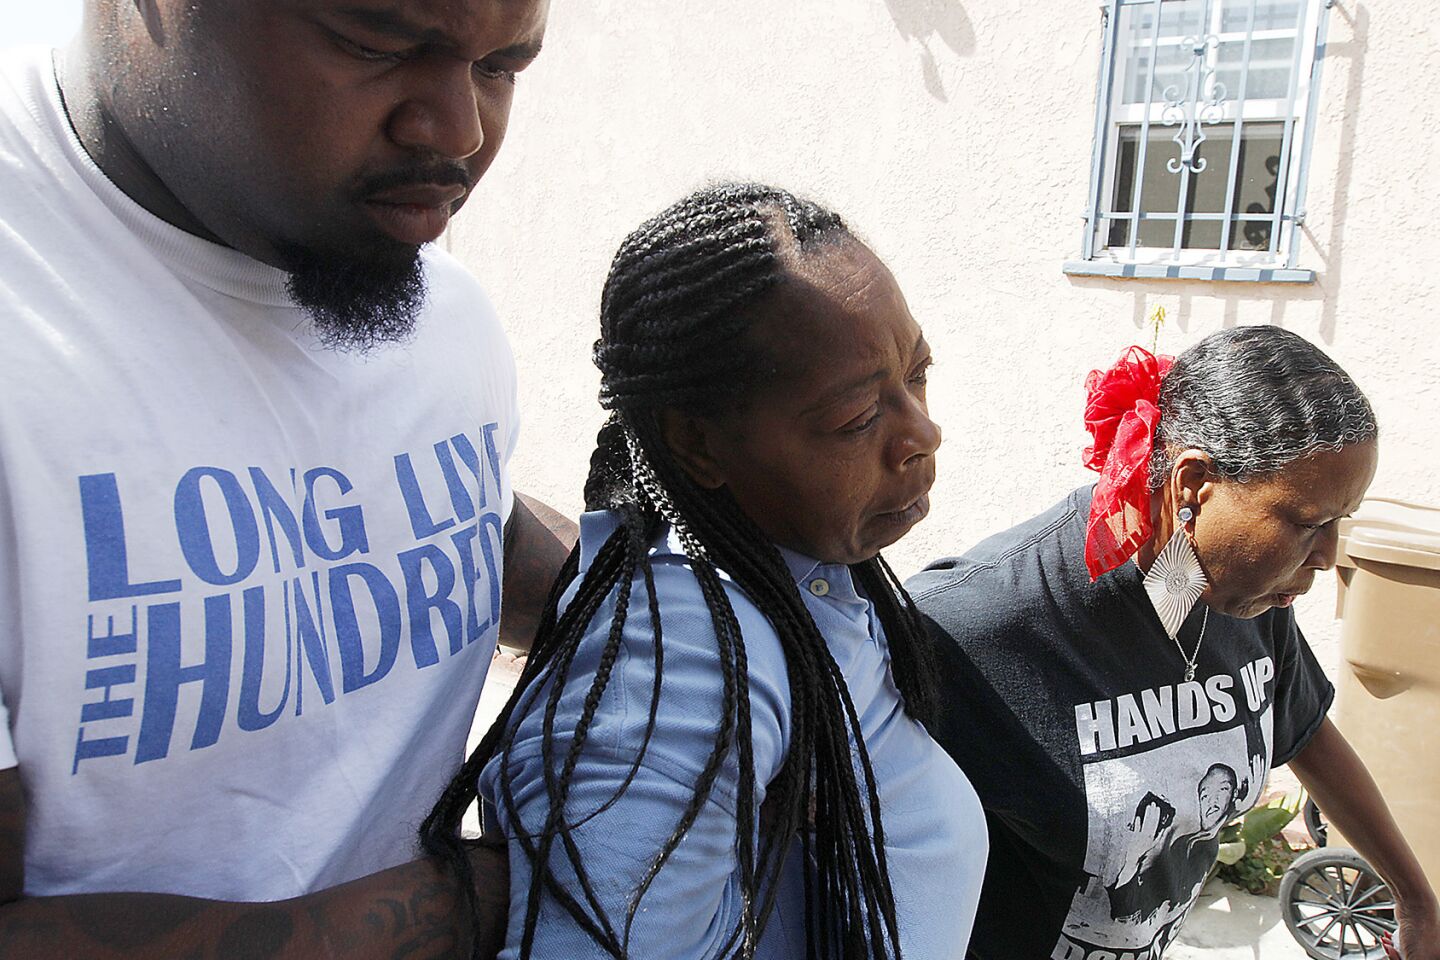 Neighbors brace a distraught Monique Morgan as she visits the scene where her son, Carnell Snell, 18, was fatally shot by police.